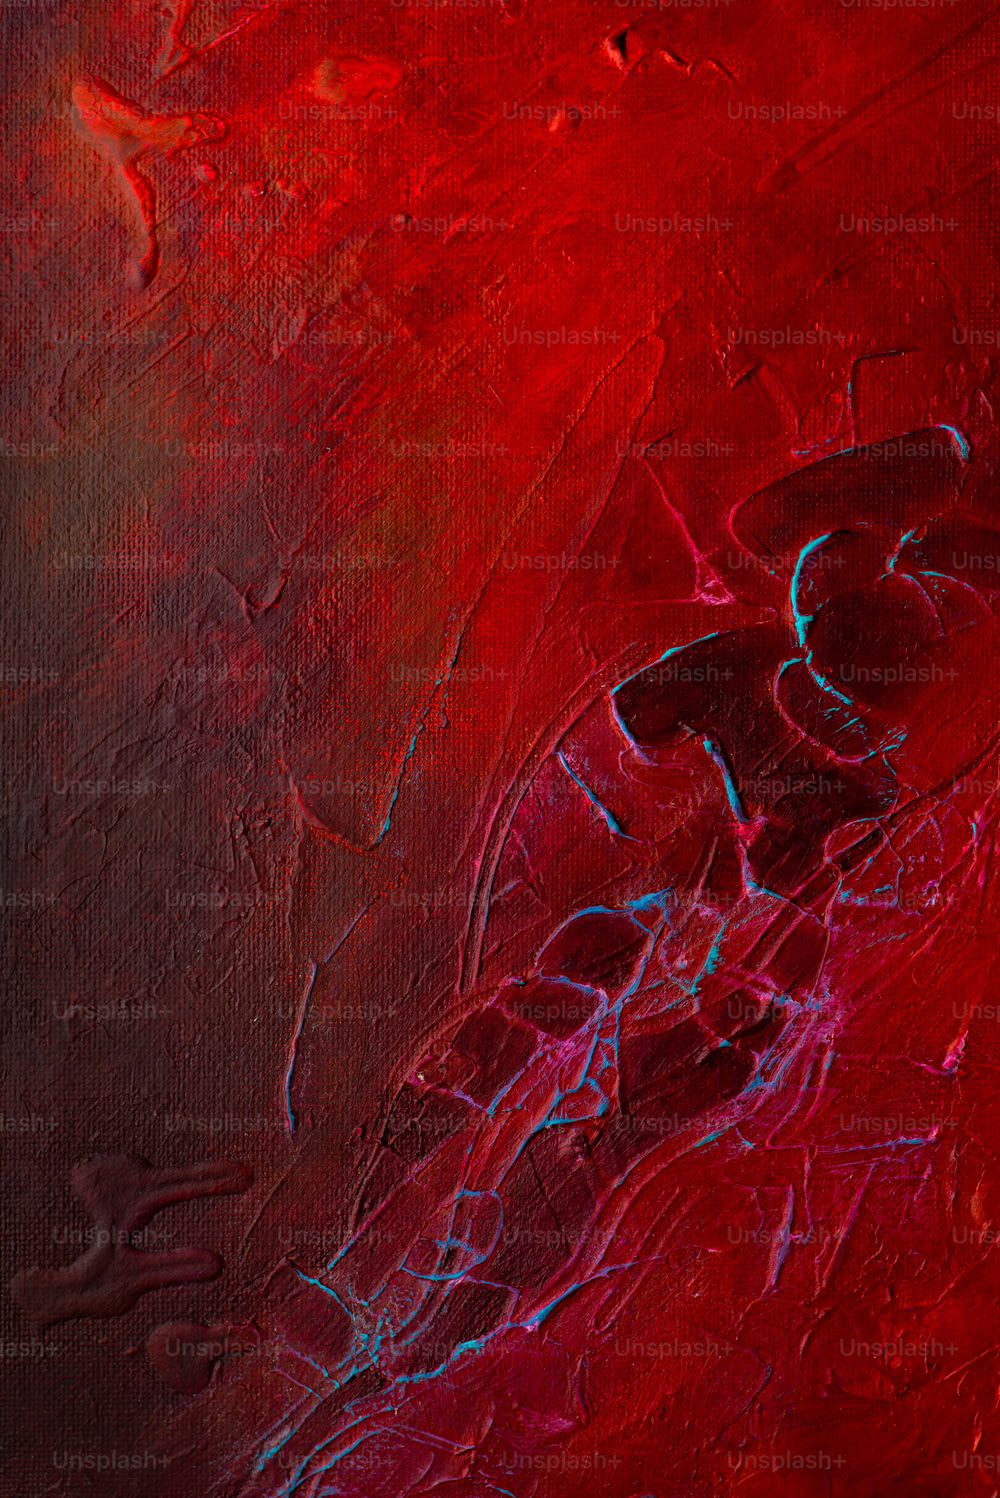 an abstract painting of red and blue colors